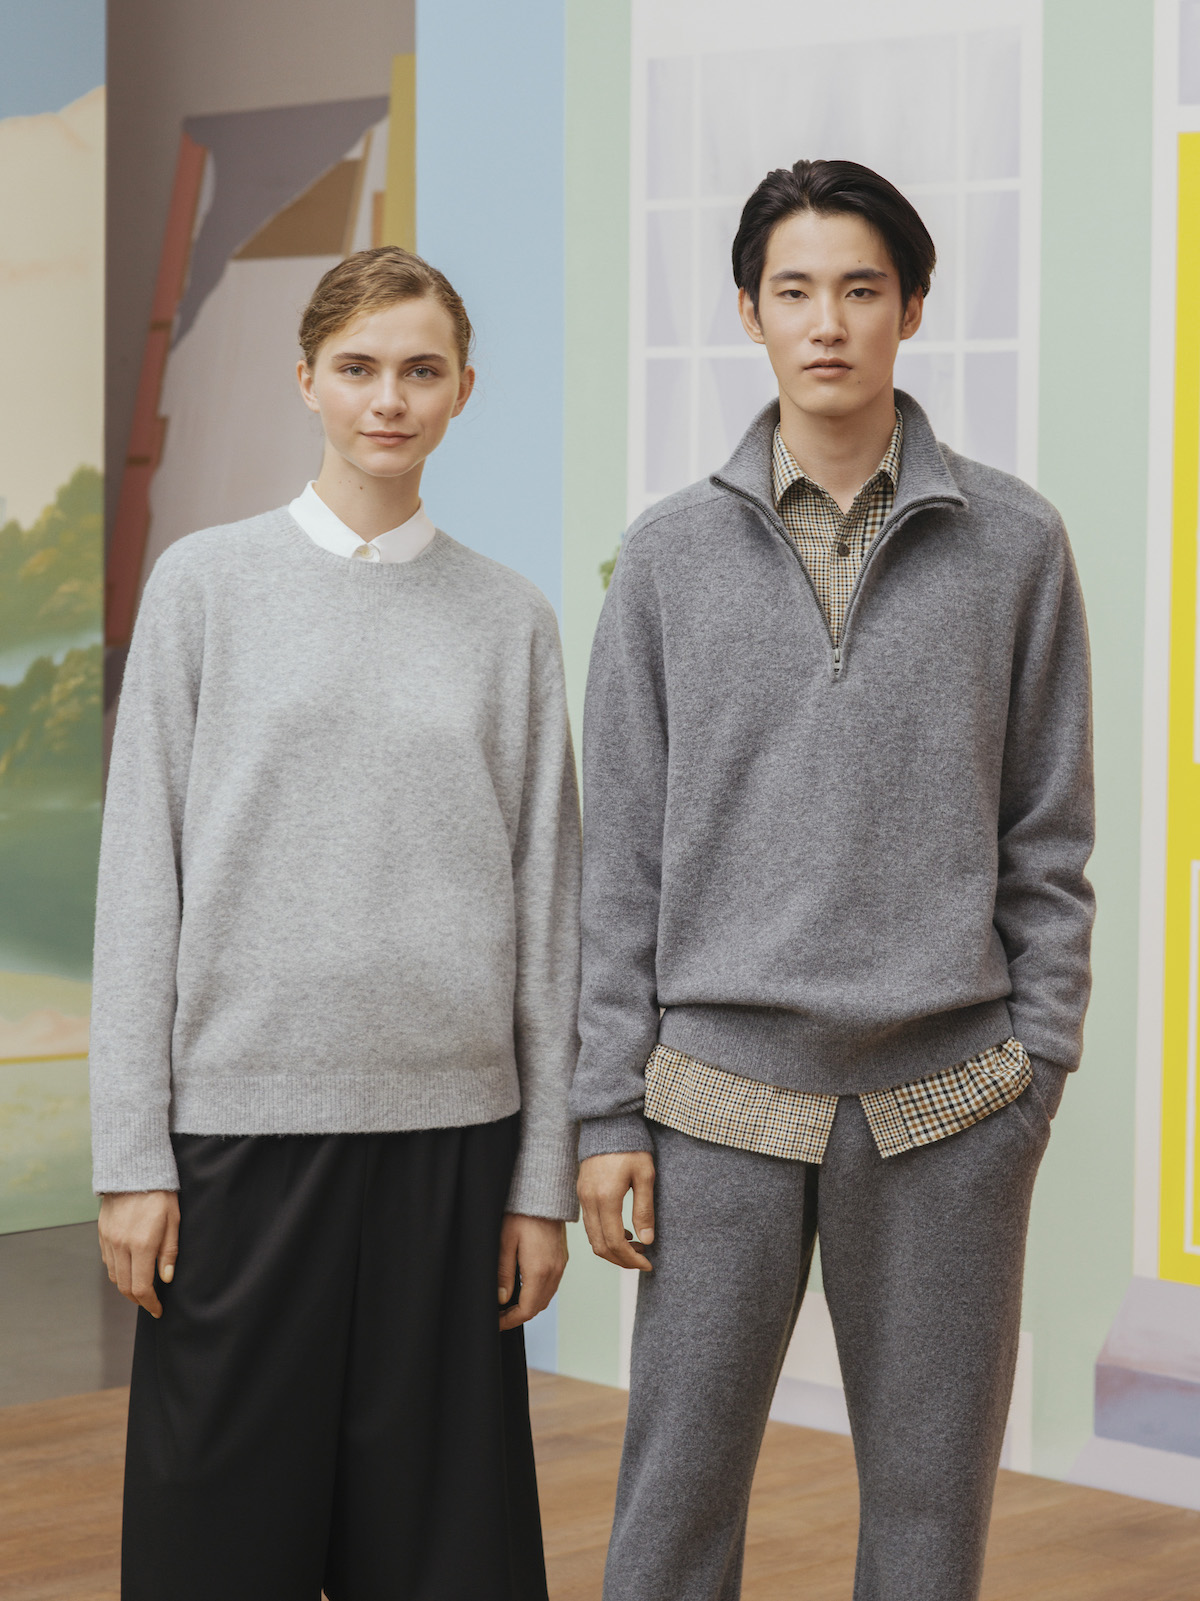 JW Anderson x Uniqlo Fall Winter 2020 Line Is Here